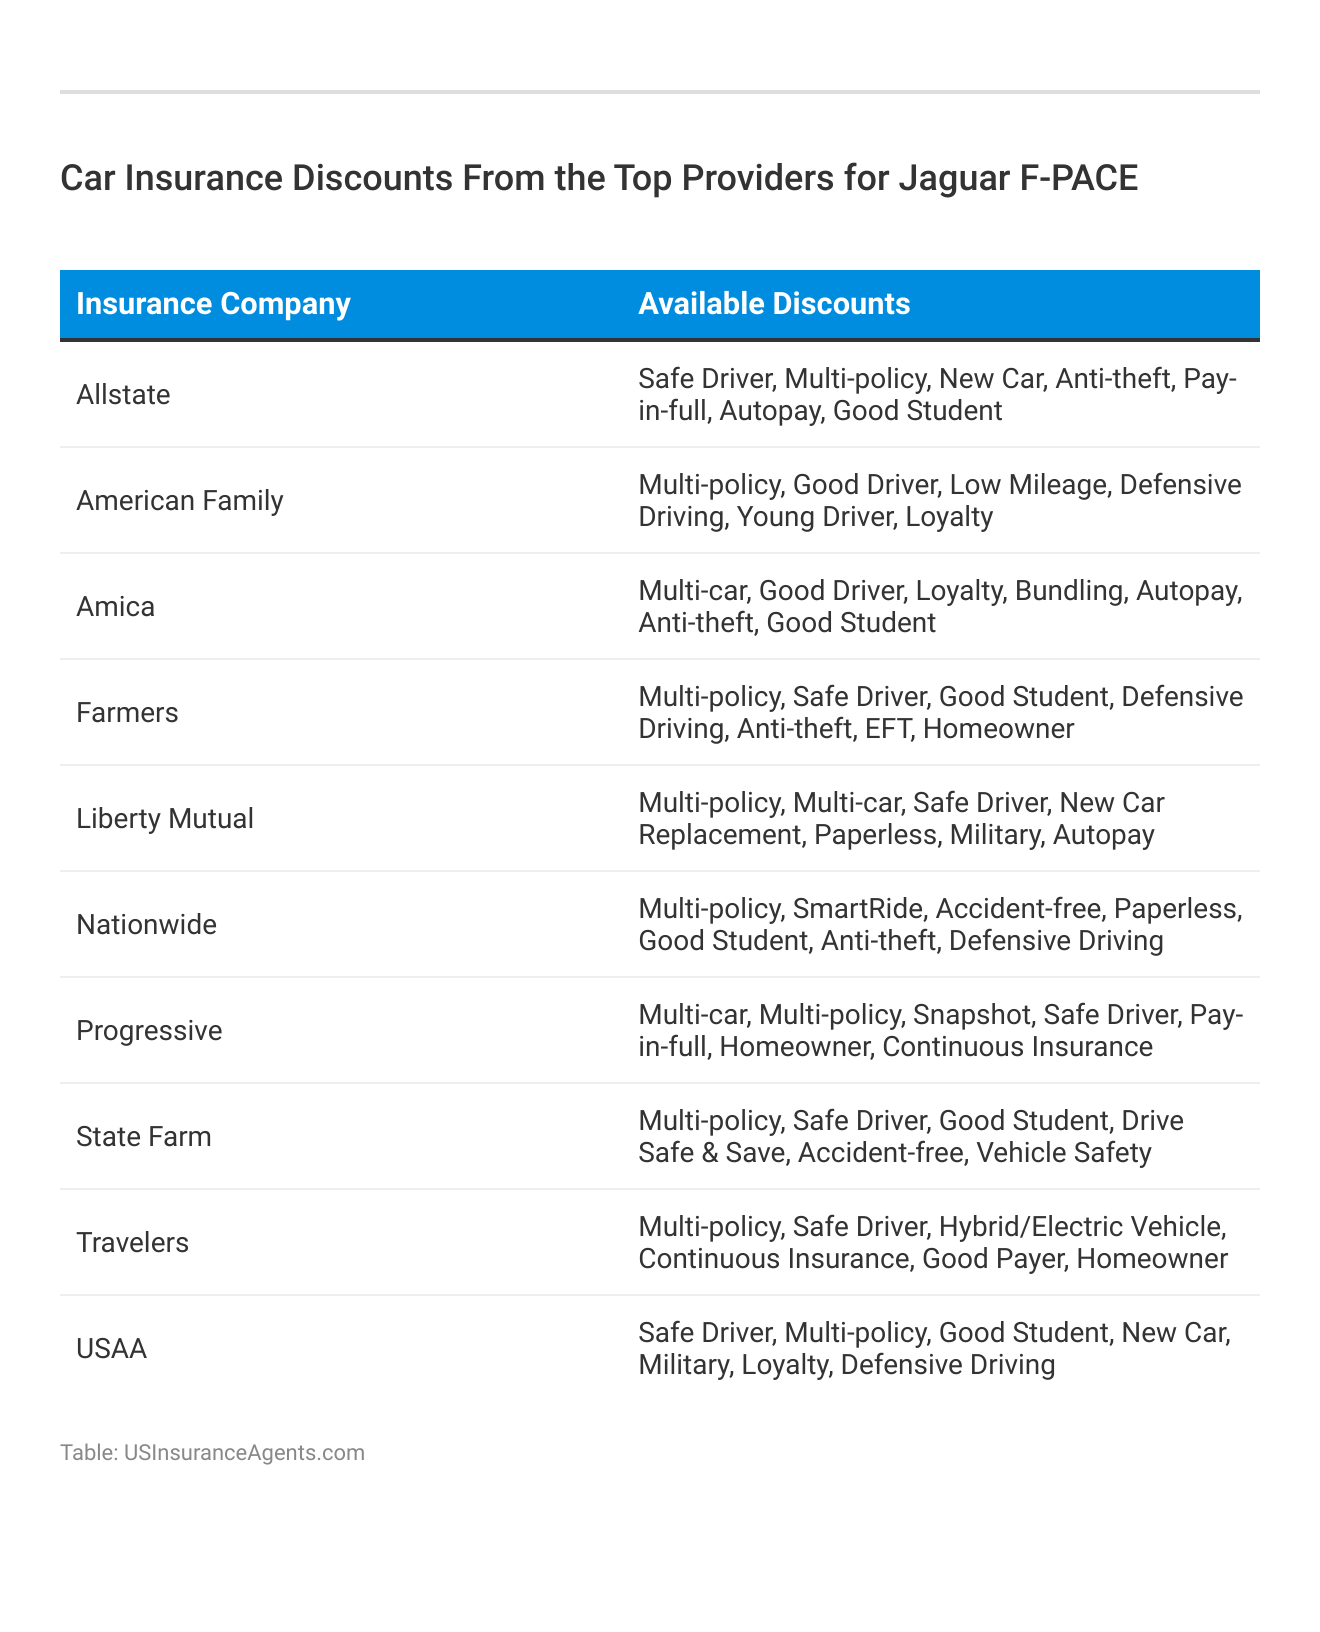 <h3>Car Insurance Discounts From the Top Providers for Jaguar F-PACE</h3>